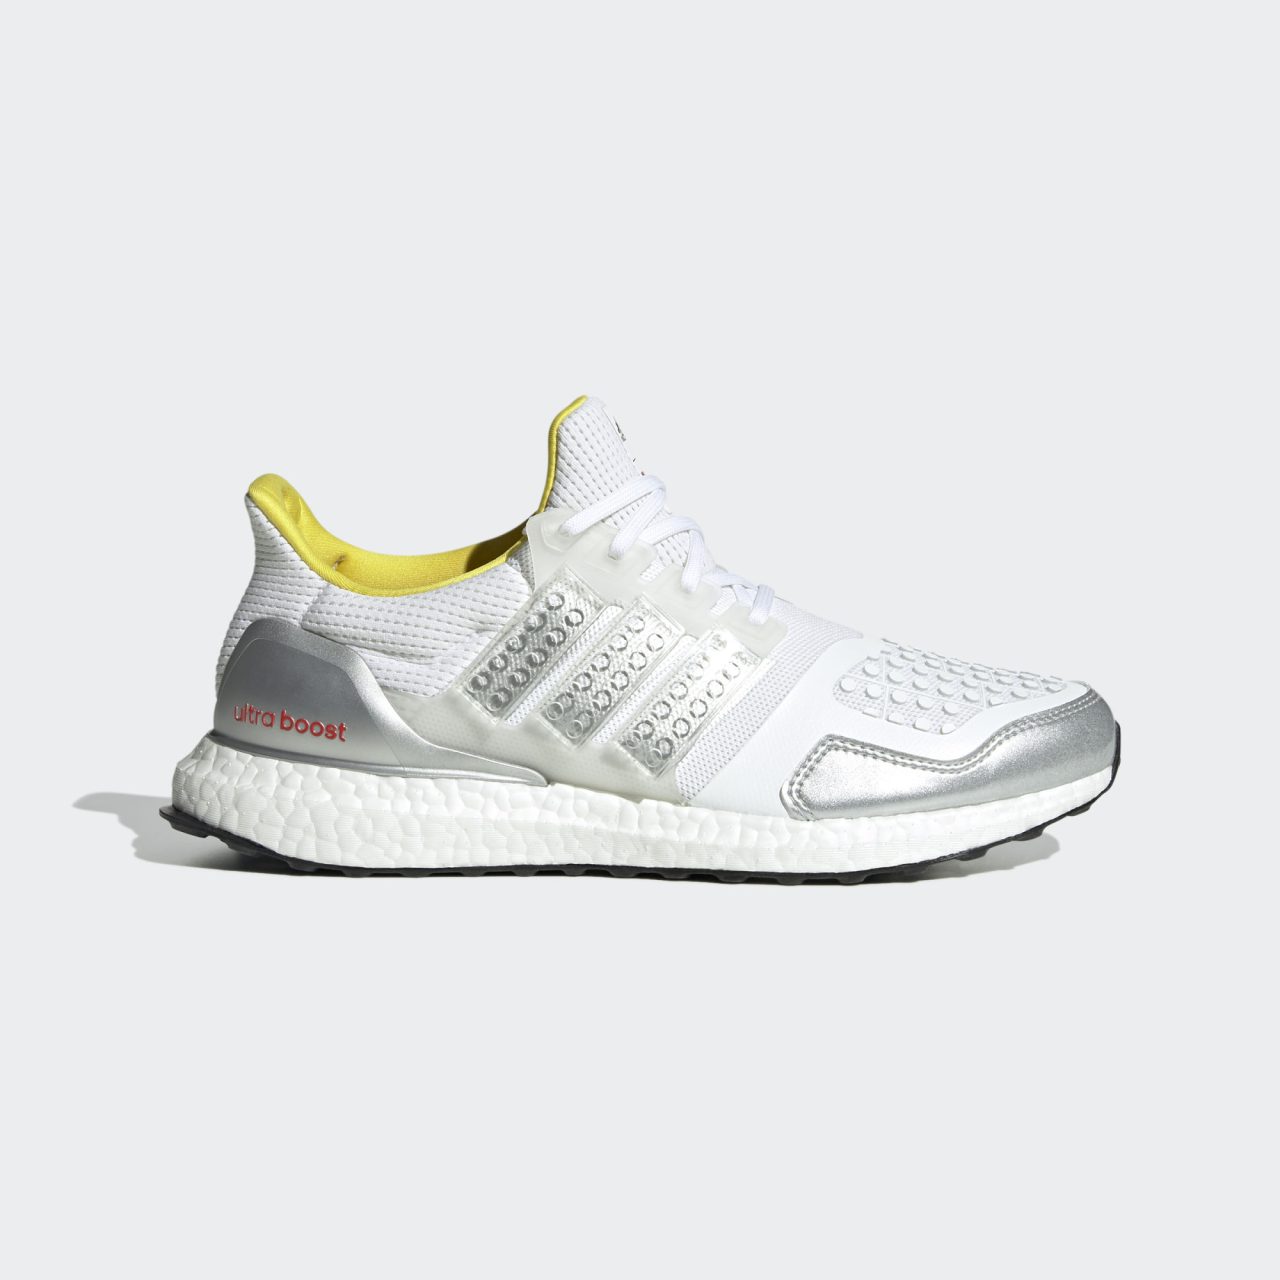 adidas_Ultraboost_DNA_x_LEGO(r)_Plates_Shoes_White_FY7690_01_standard